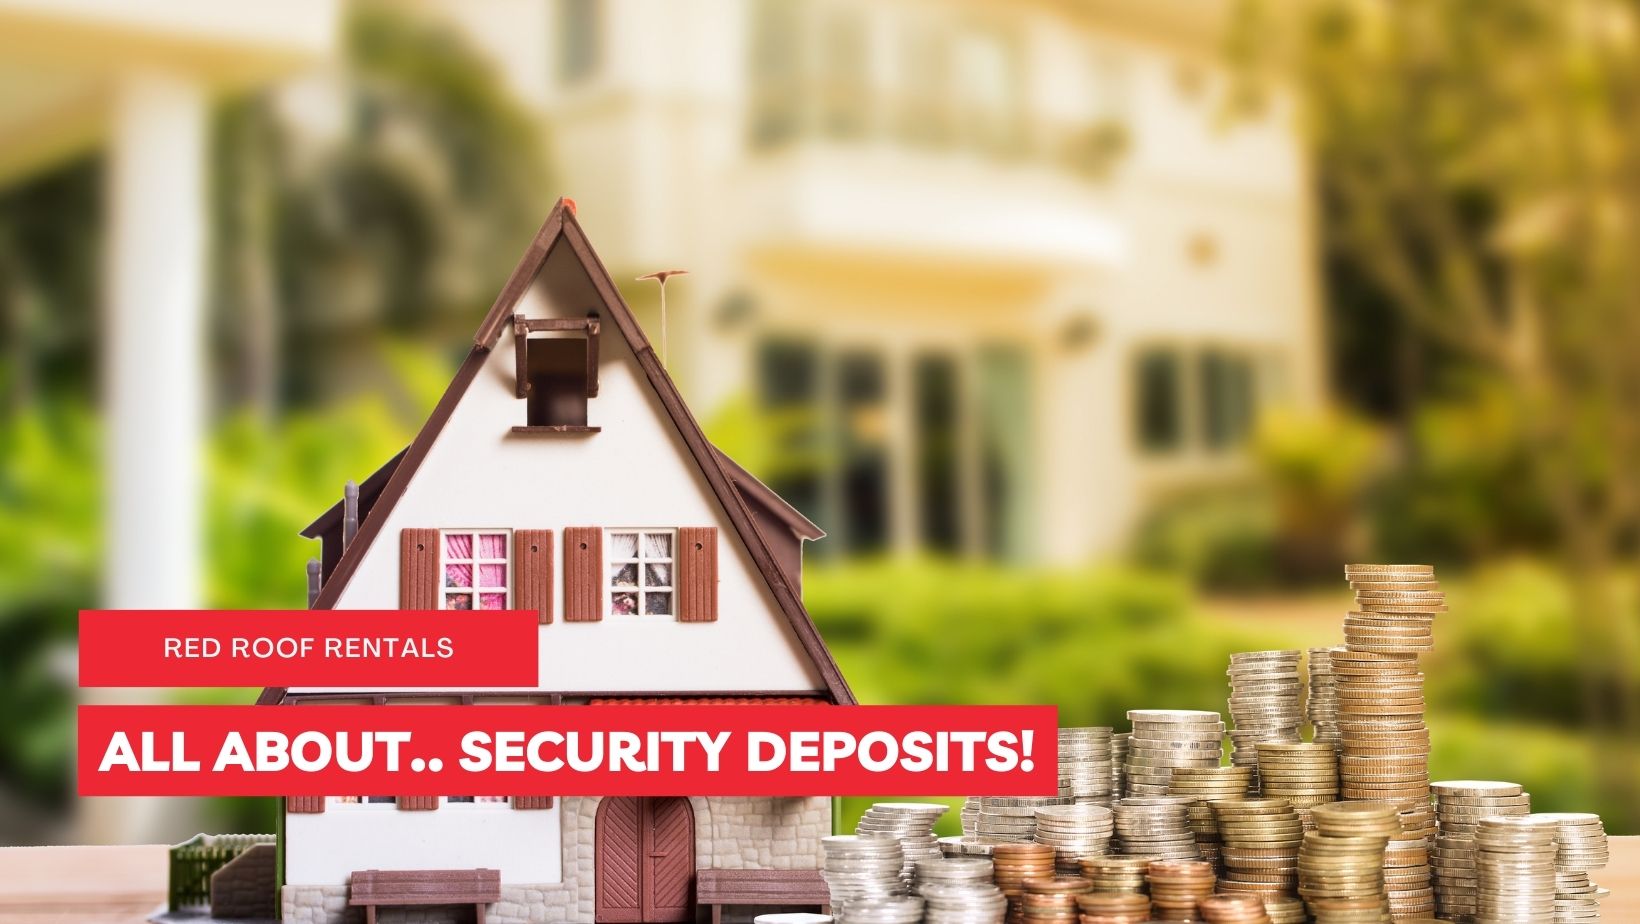 ALL ABOUT.. SECURITY DEPOSITS!